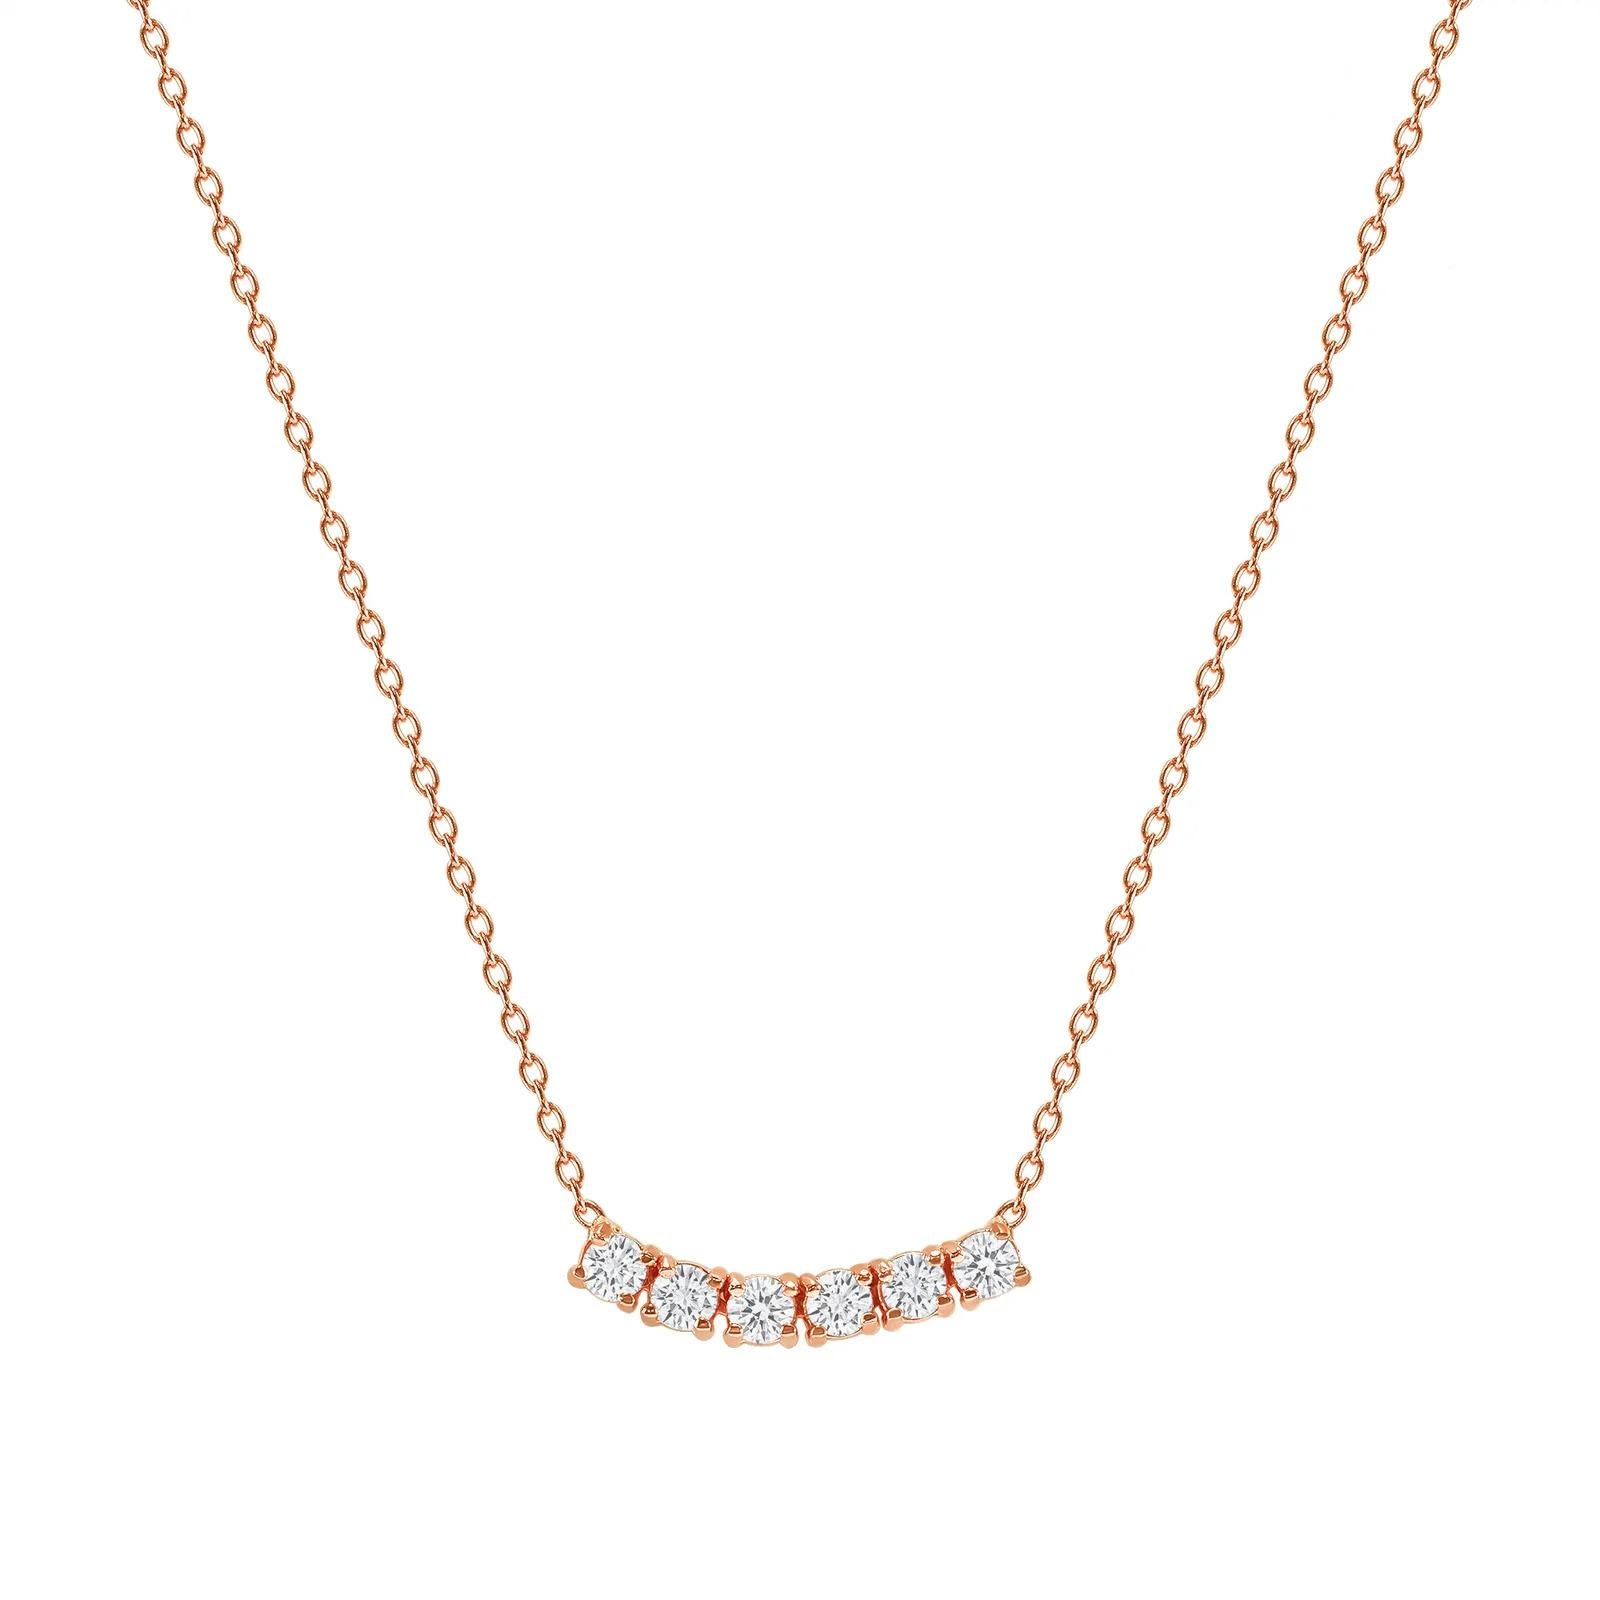 This petite, curved diamond necklace is crafted with gorgeous 14k gold set with six round diamonds.  

Gold: 14k 
Diamond Total Carats: 0.25 ct
Diamond Cut: Round (6 diamonds)
Diamond Clarity: VS
Diamond Color: F
Color: Rose Gold
Necklace Length: 20